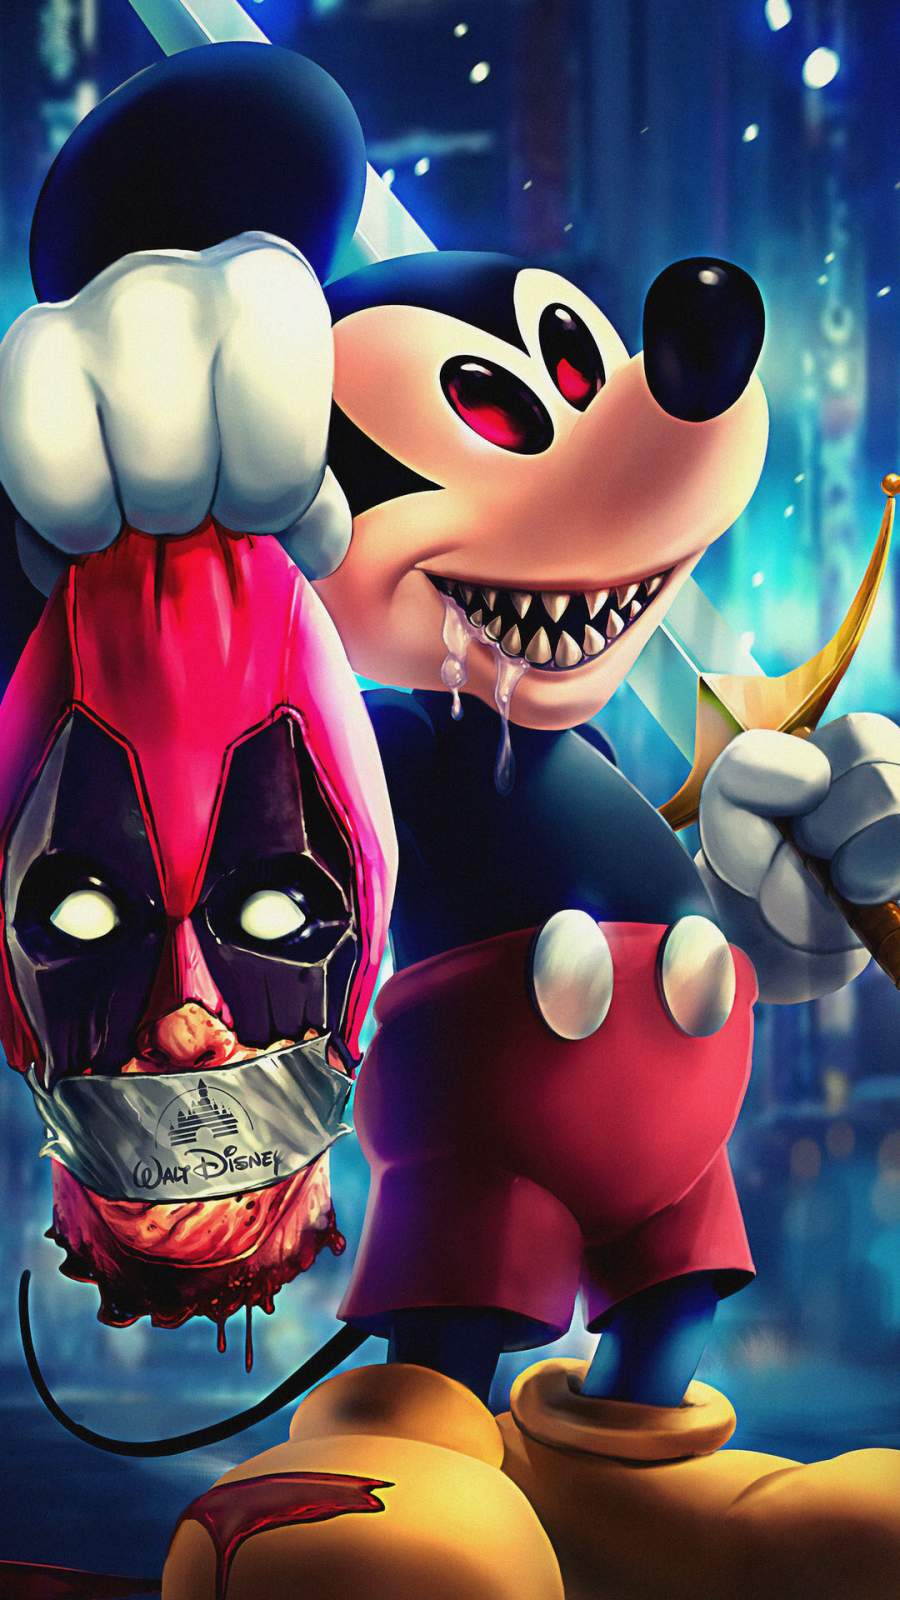 Disney Evil Mickey Mouse IPhone Wallpaper - IPhone Wallpapers : iPhone  Wallpapers